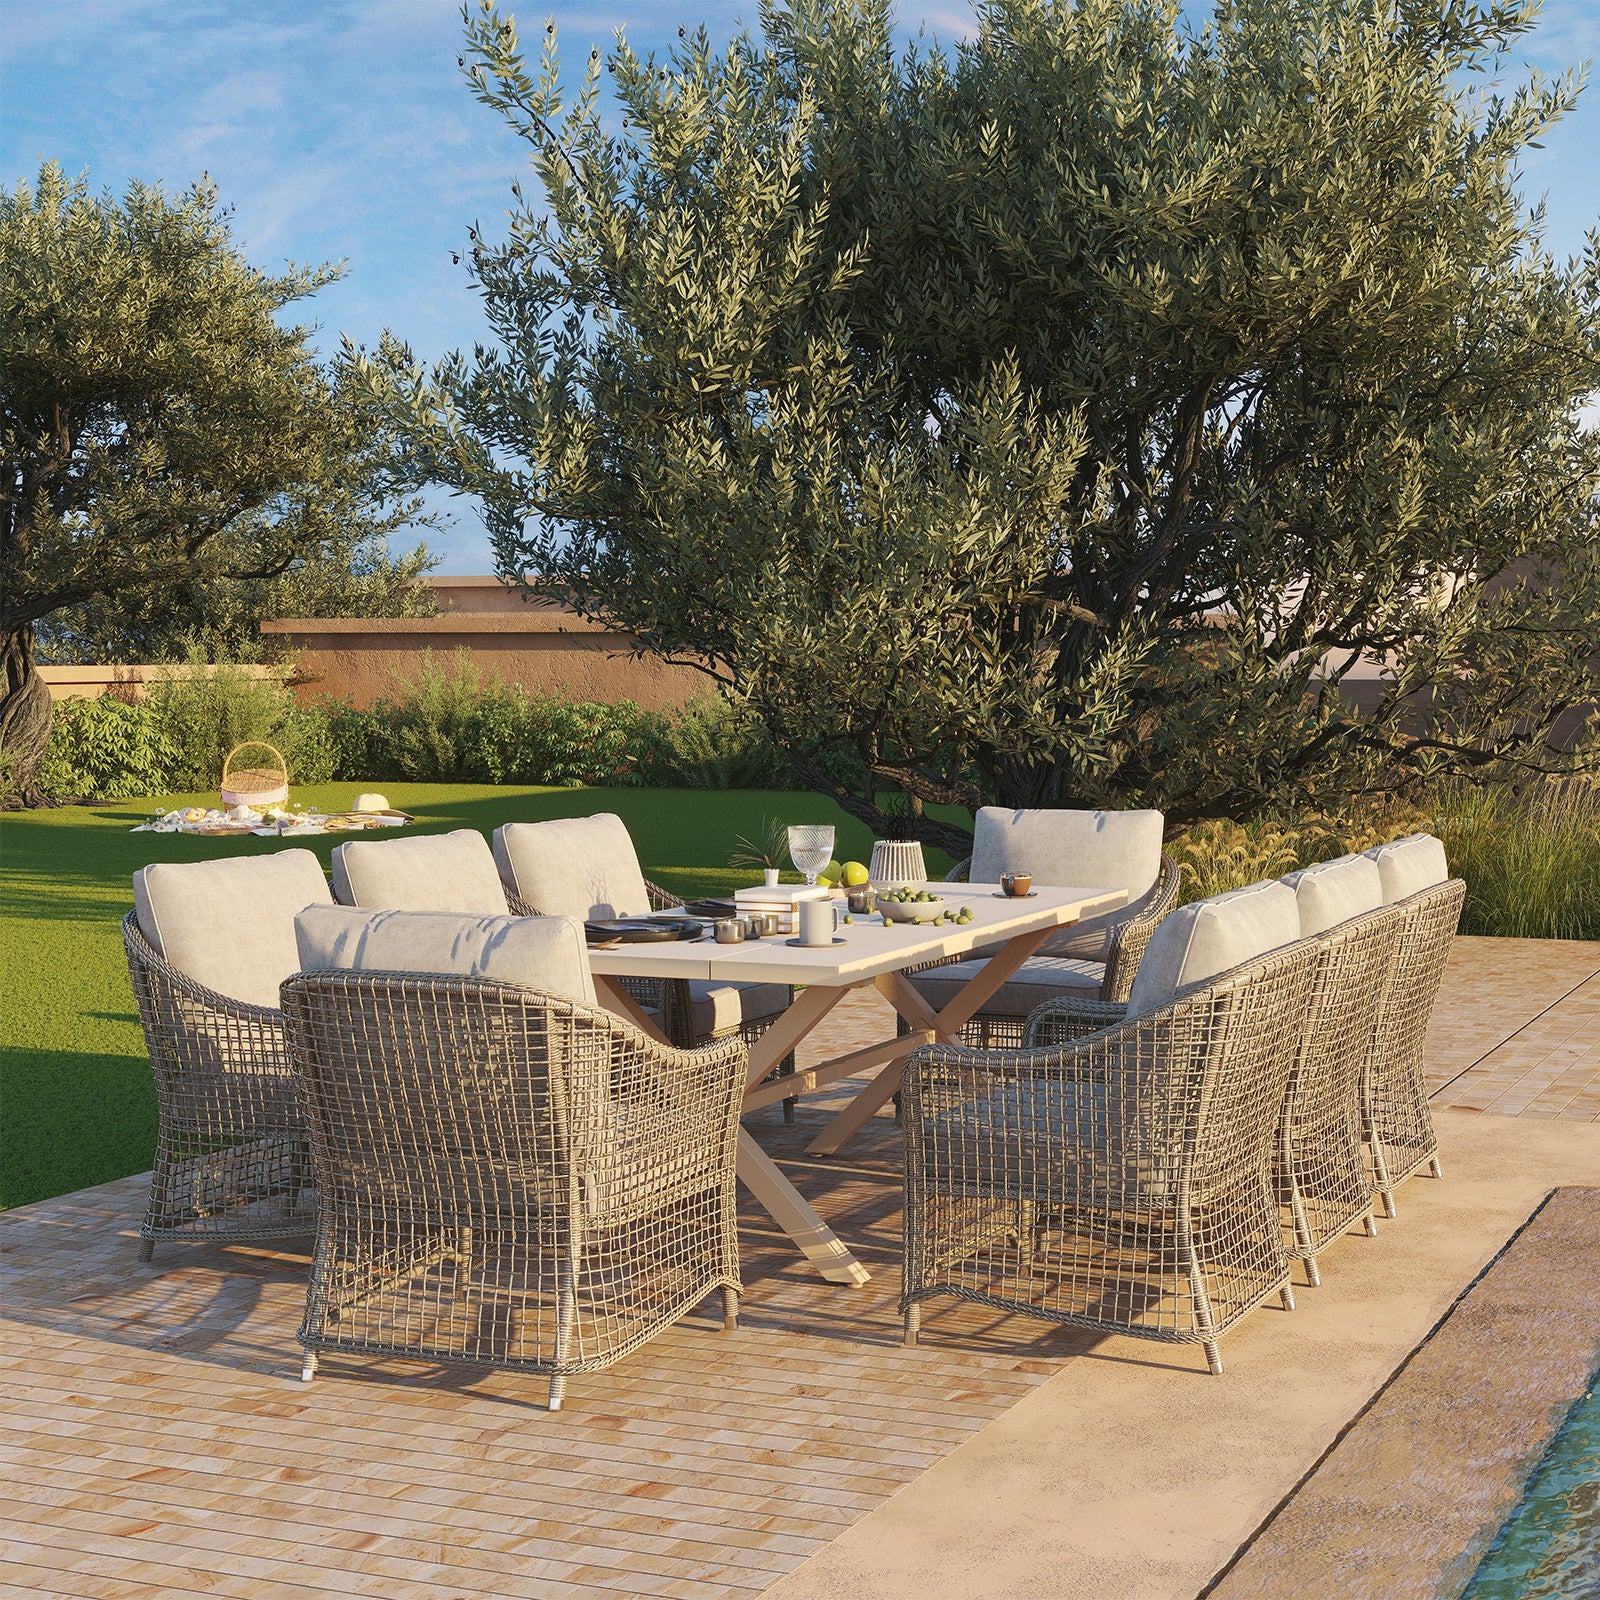 4th of July Patio Furniture Sale 2023! Up to 30% Off at Jardina